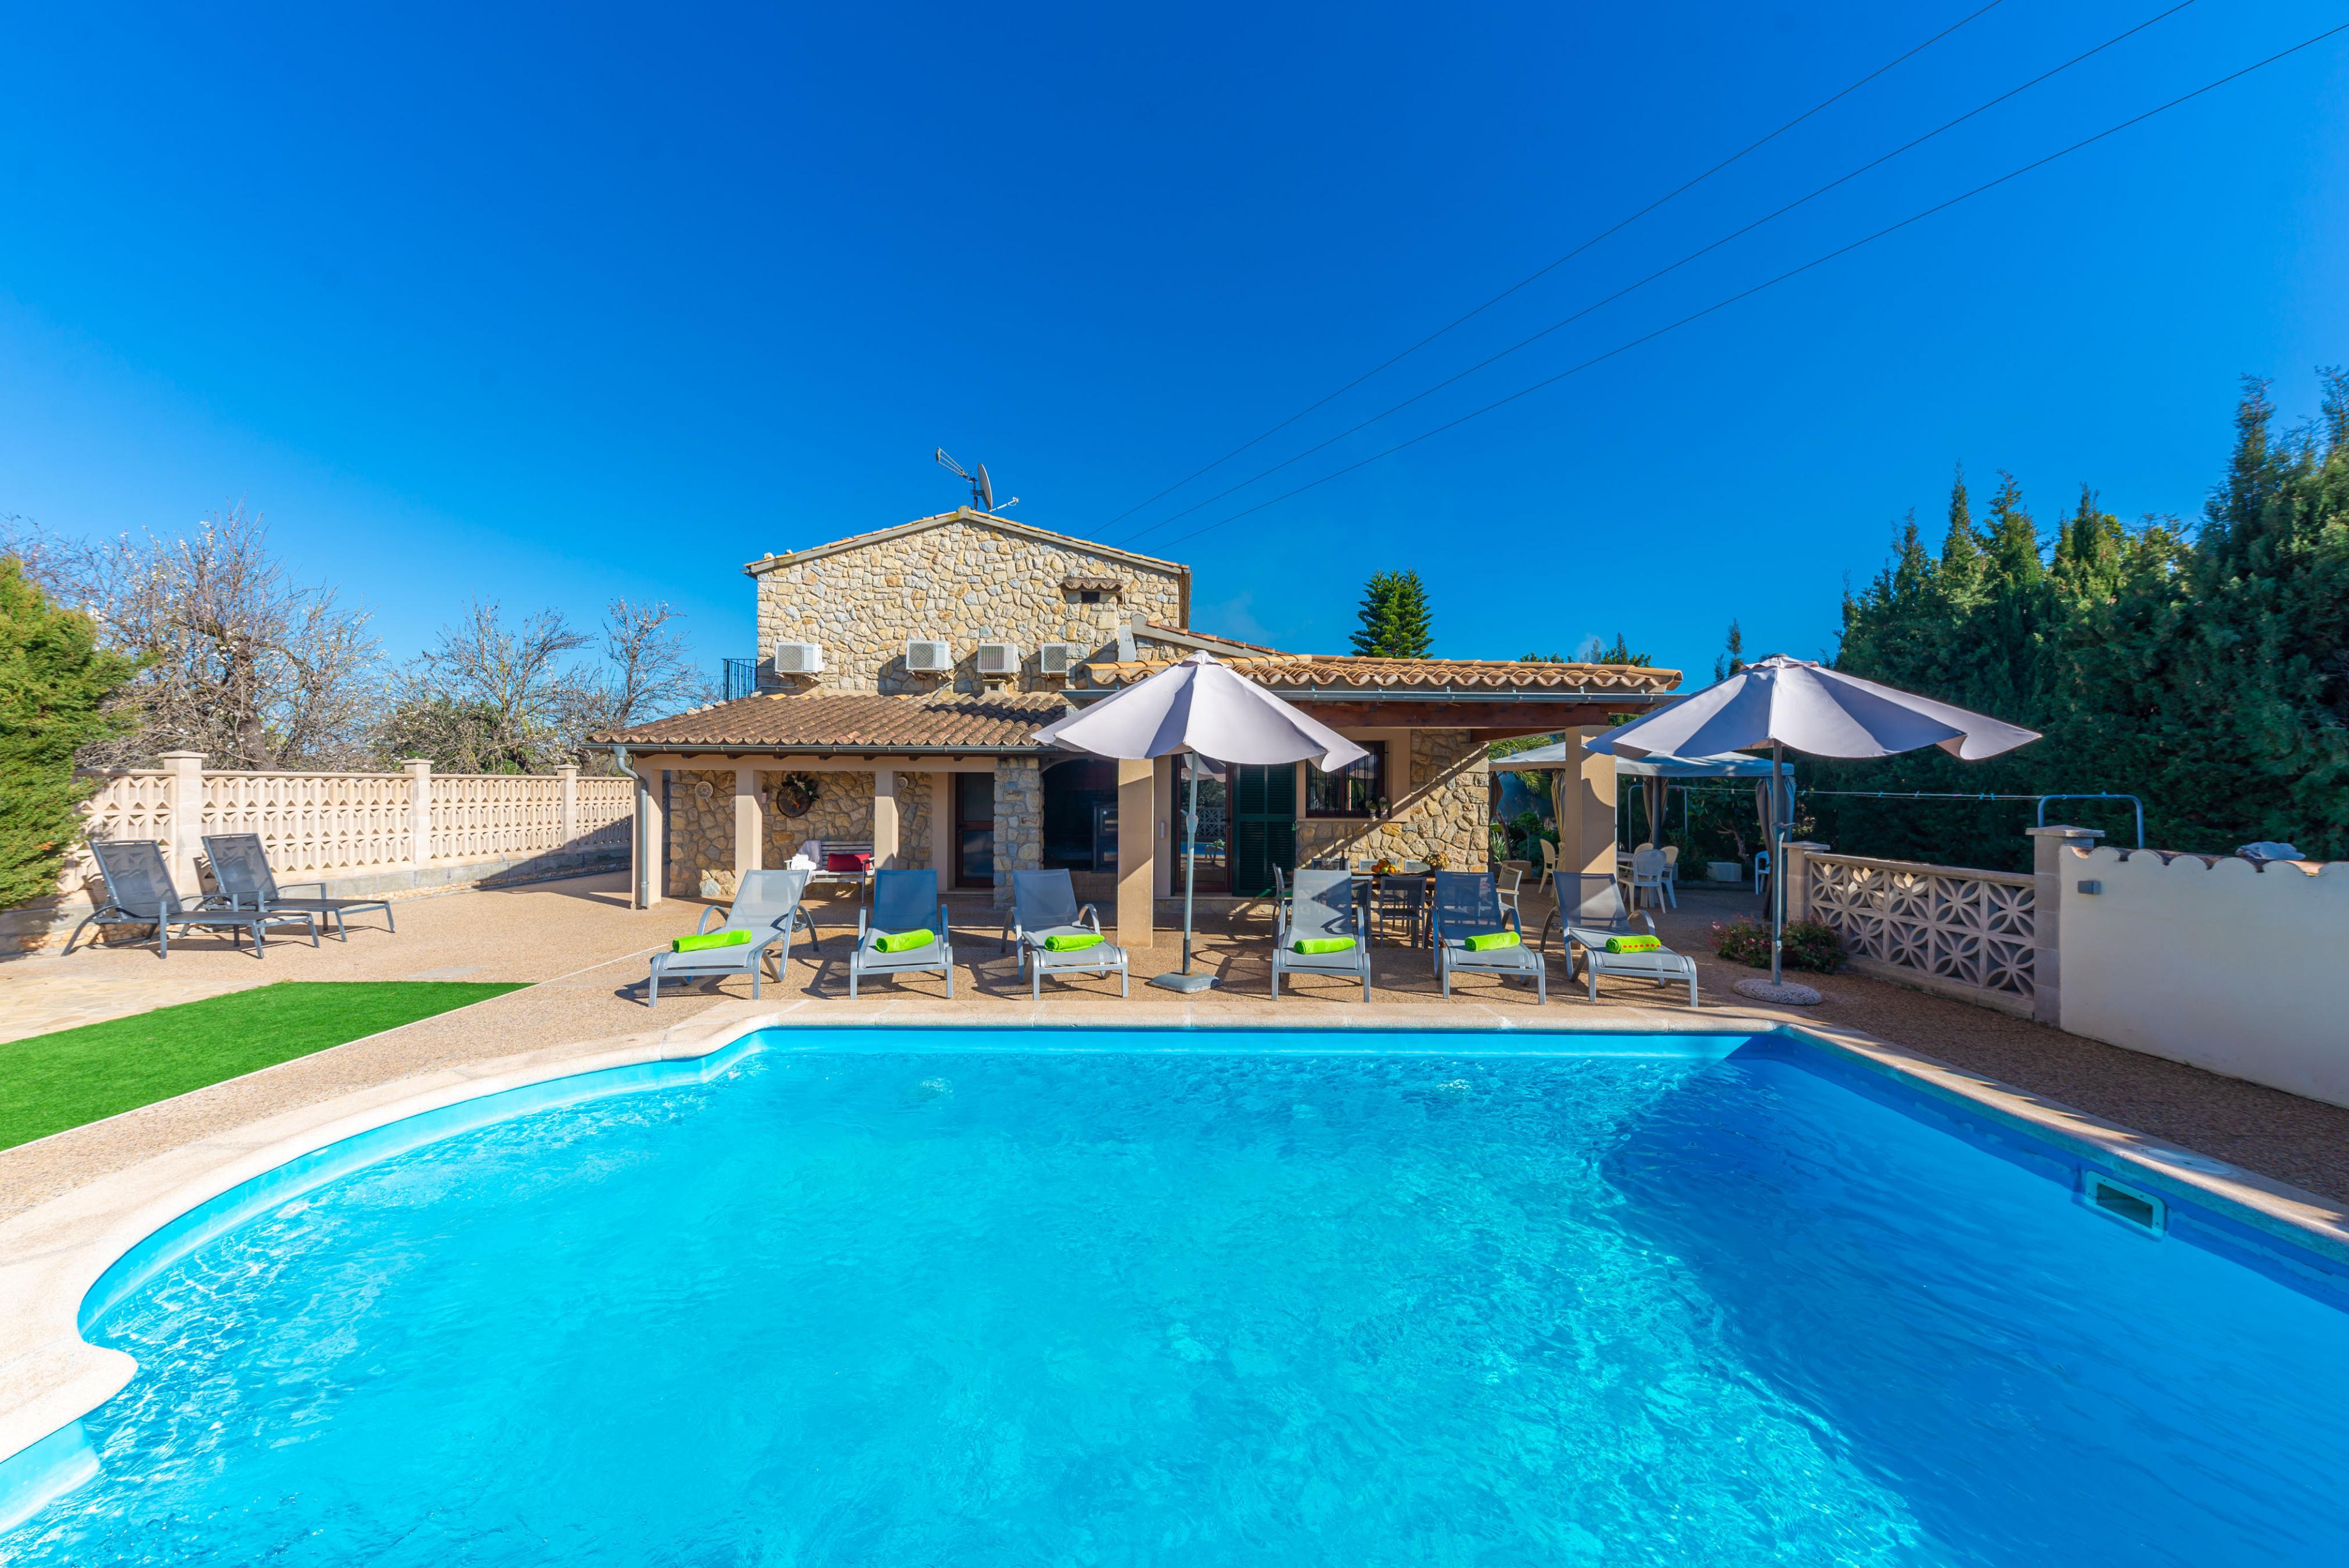 Property Image 2 - CAN ANTICH - Great country house with private pool. Free WiFi